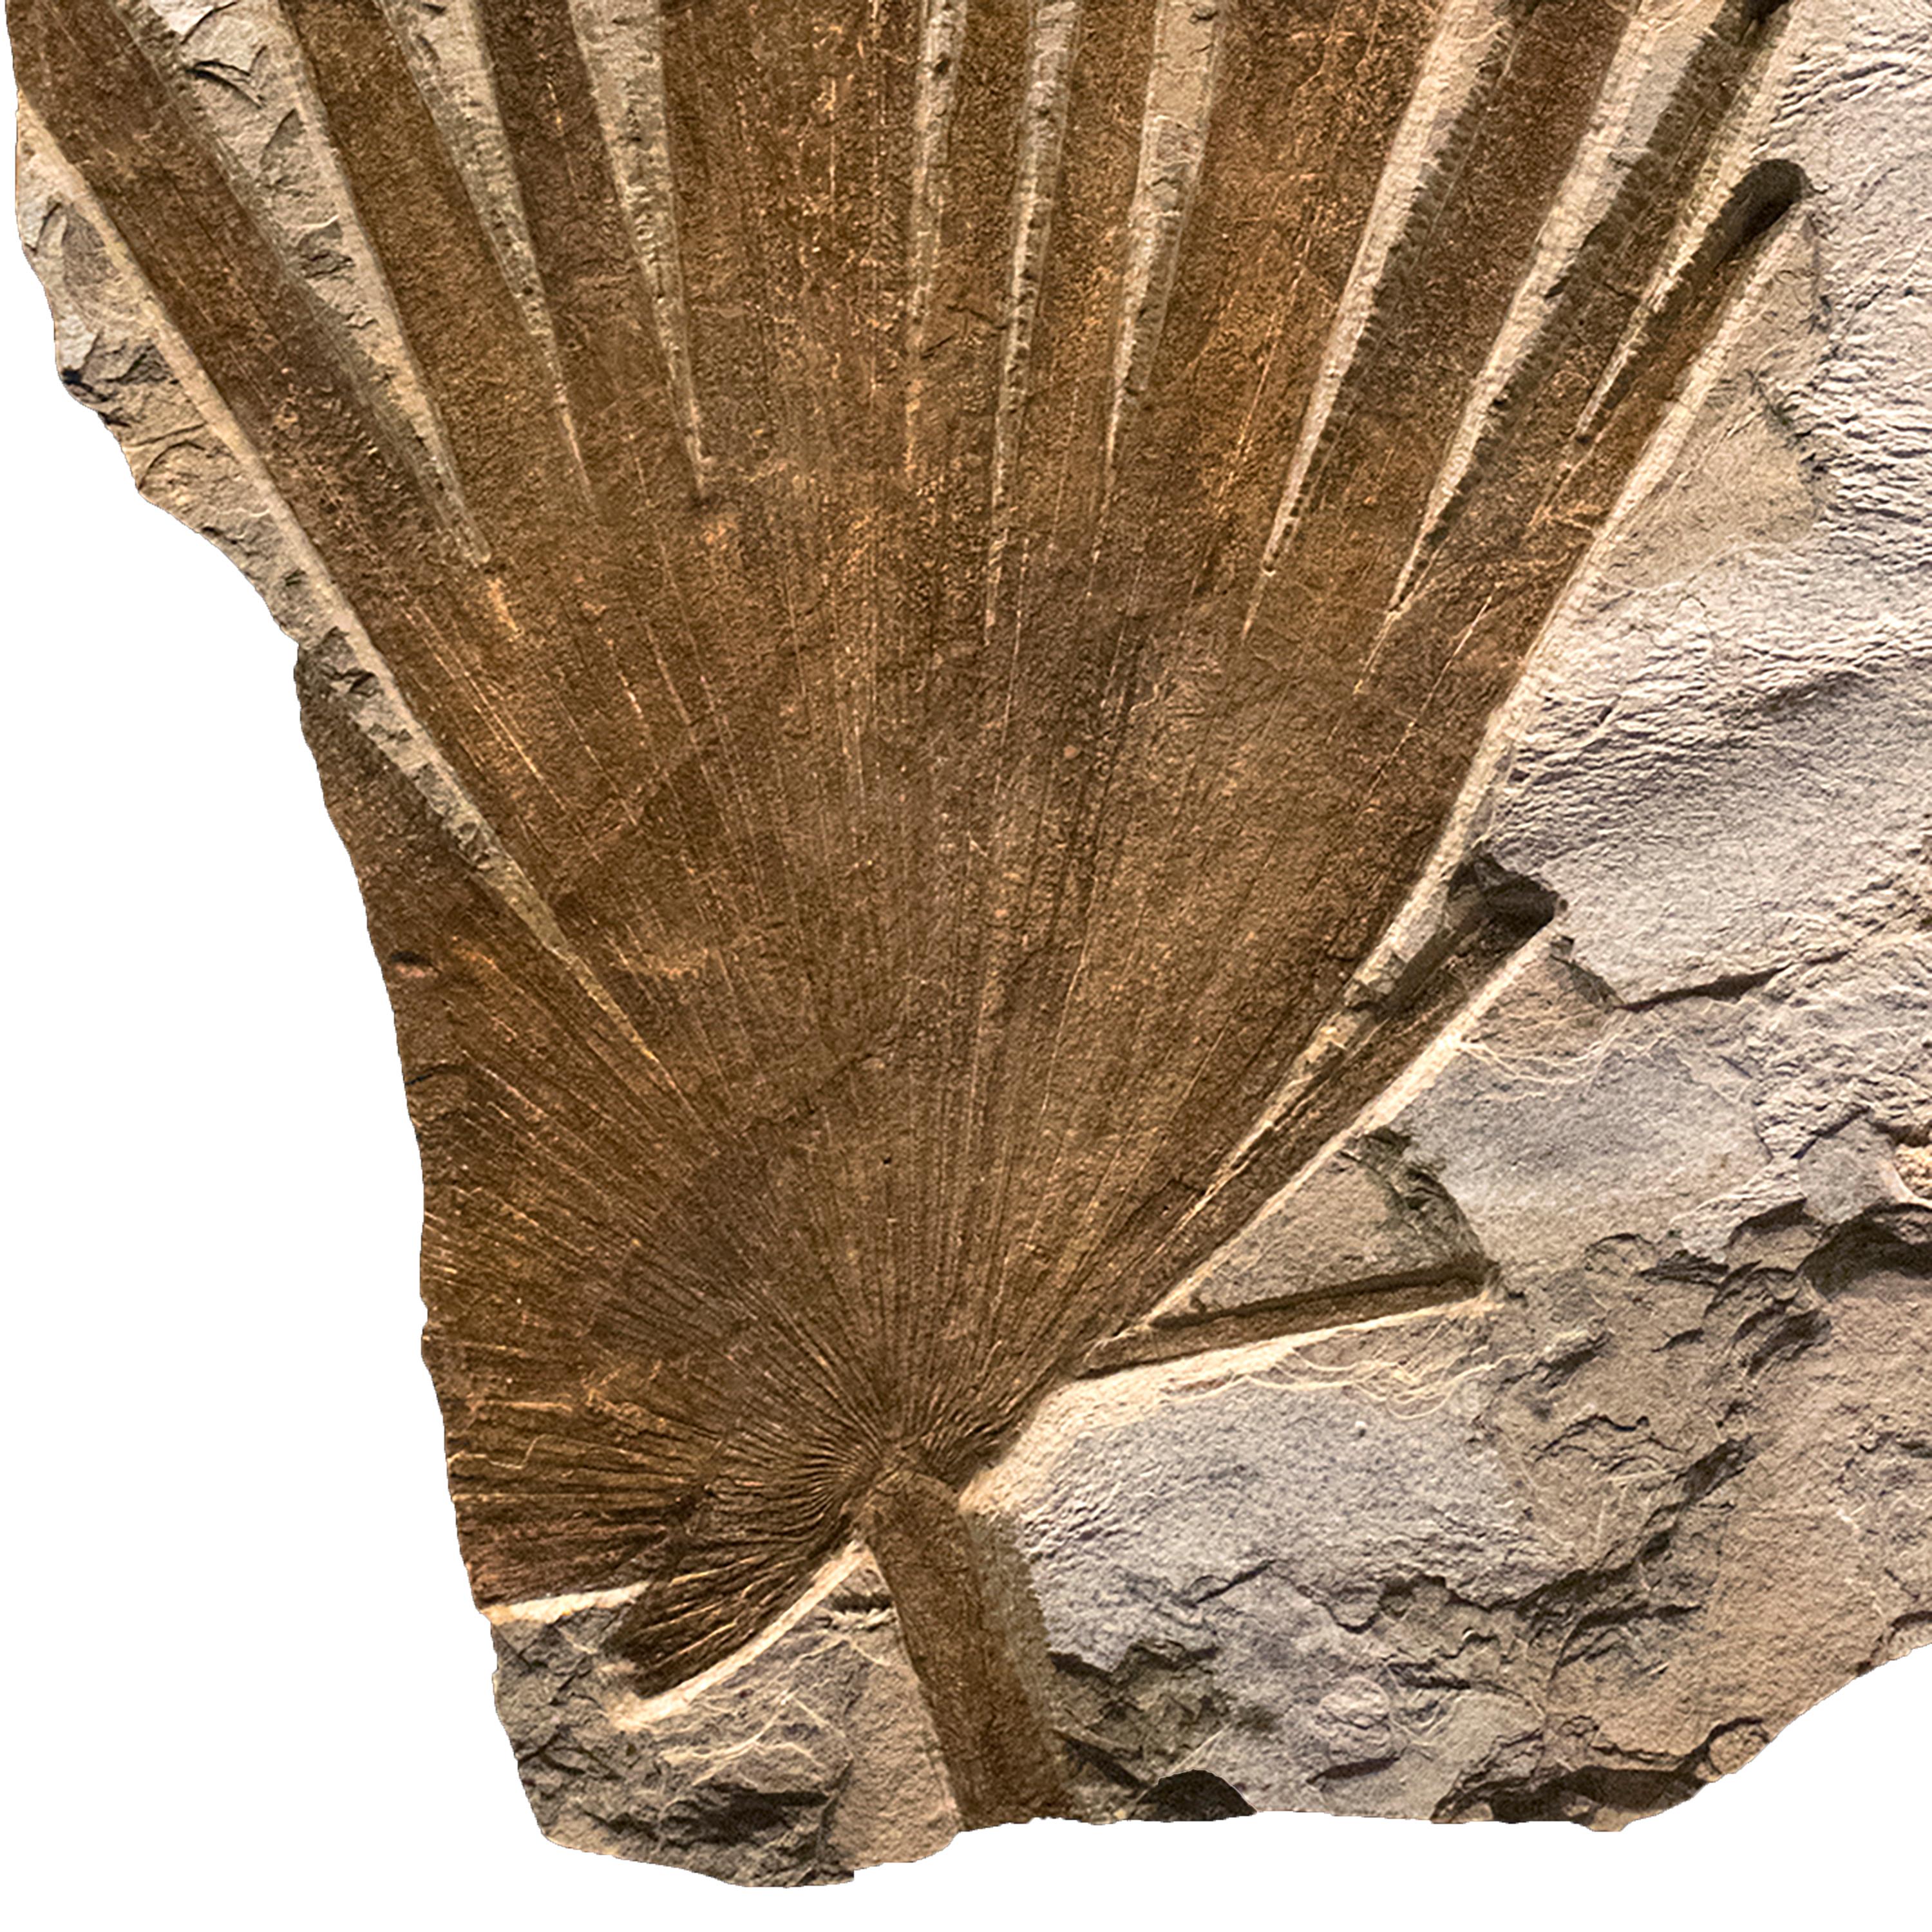 American 50 Million Year Old Eocene Era Fossil Palm Frond Mural in Stone, from Wyoming